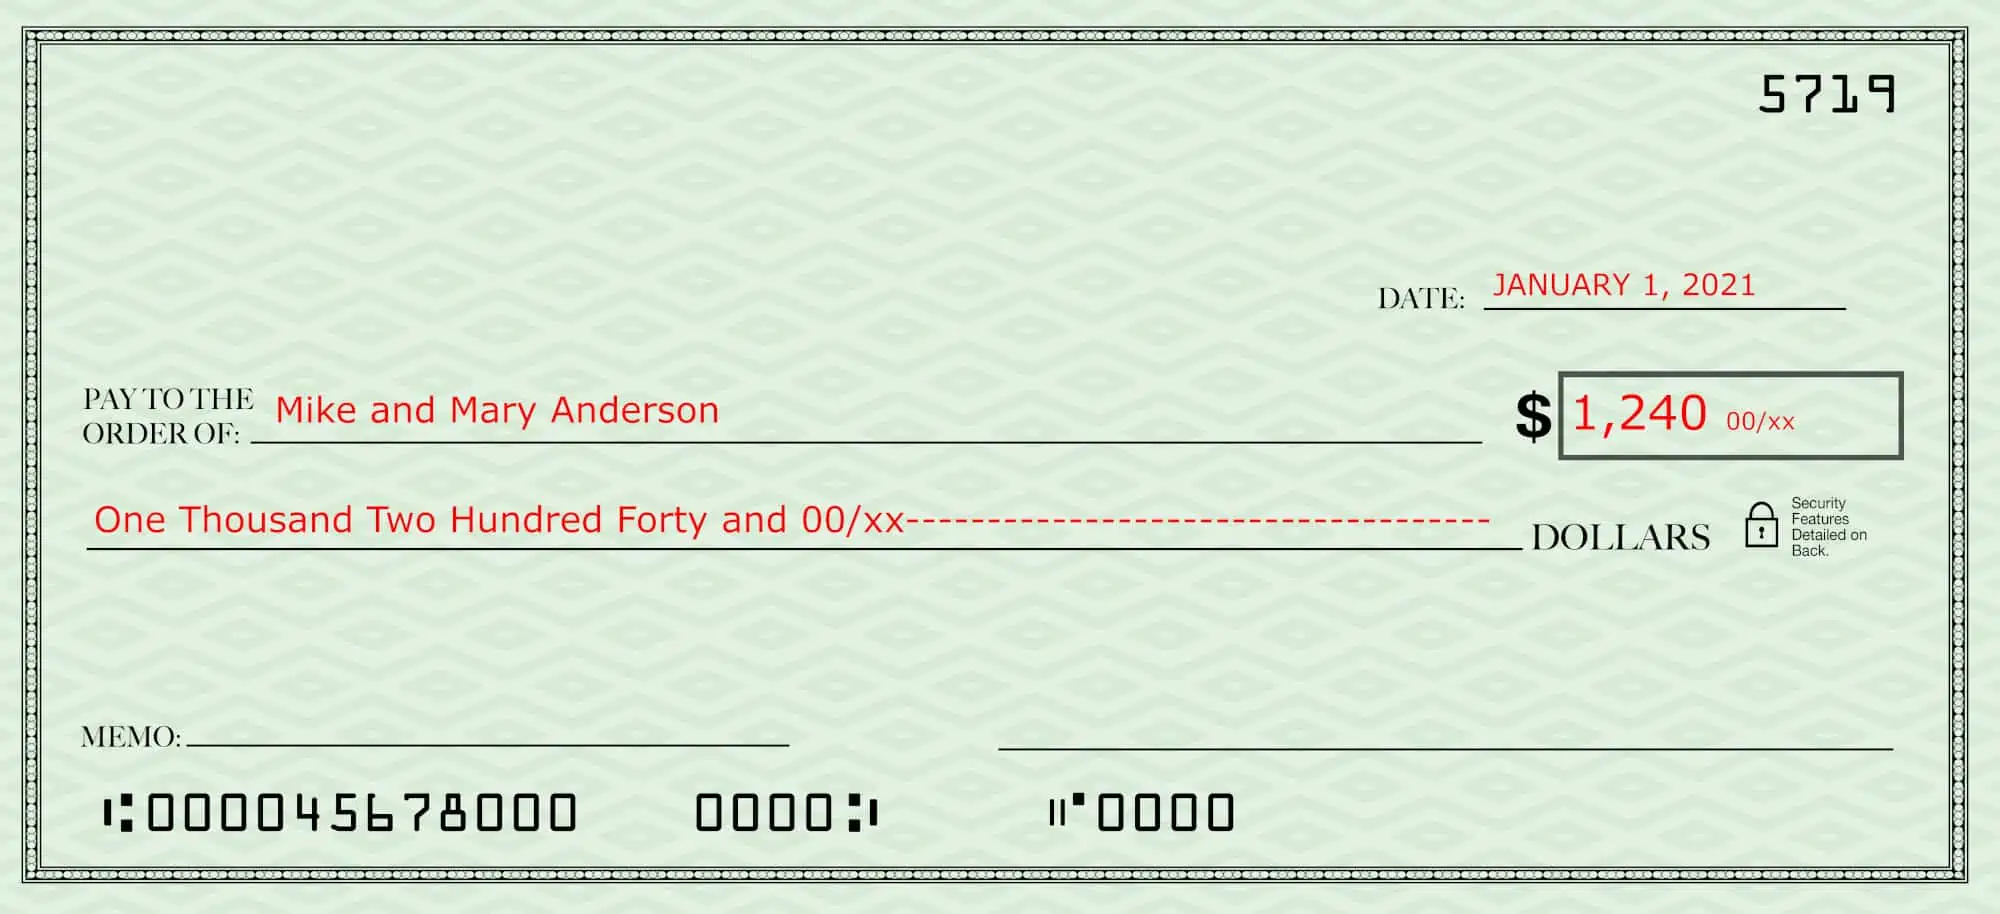 Filling out a check--blank check with the date, payee and amount in both words and numbers filled in